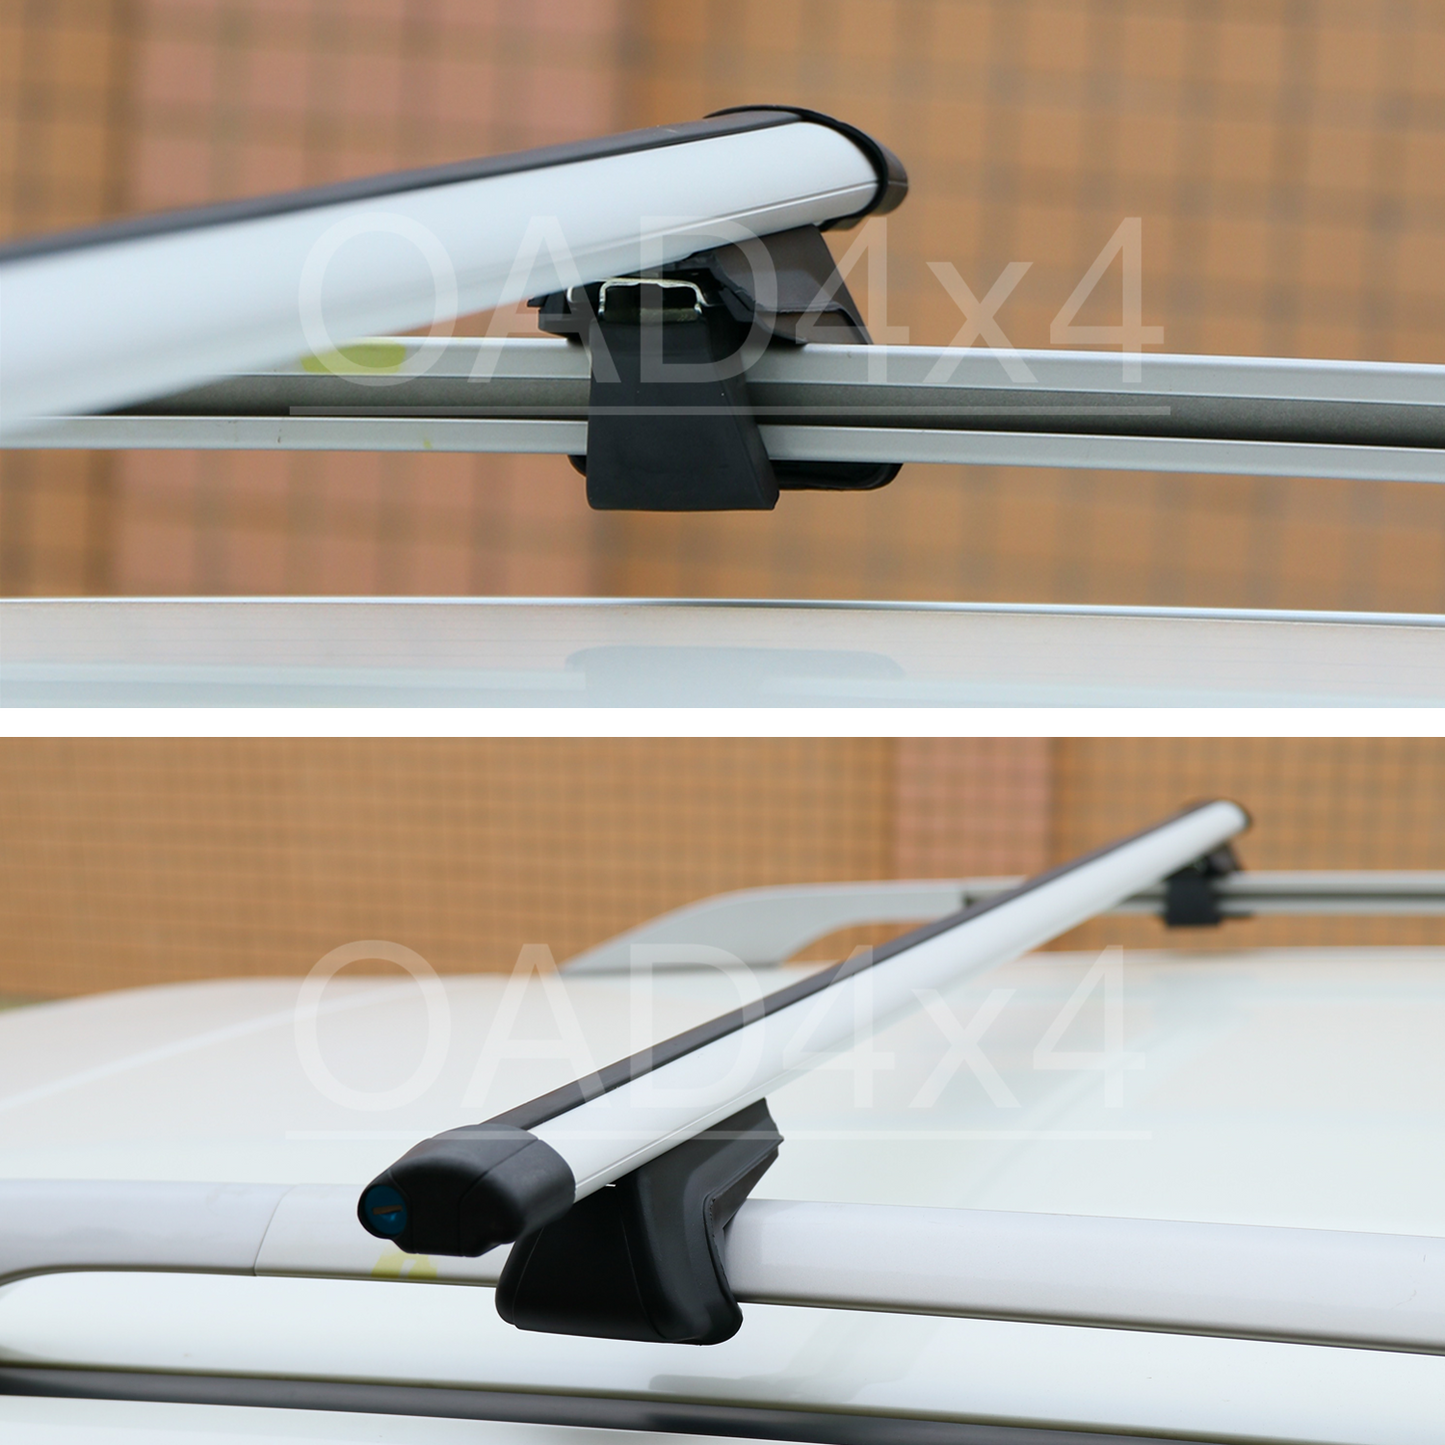 1 Pair Aluminum Silver Cross Bar Roof Racks Baggage holder for Lexus RX350 06-15 with raised roof rail